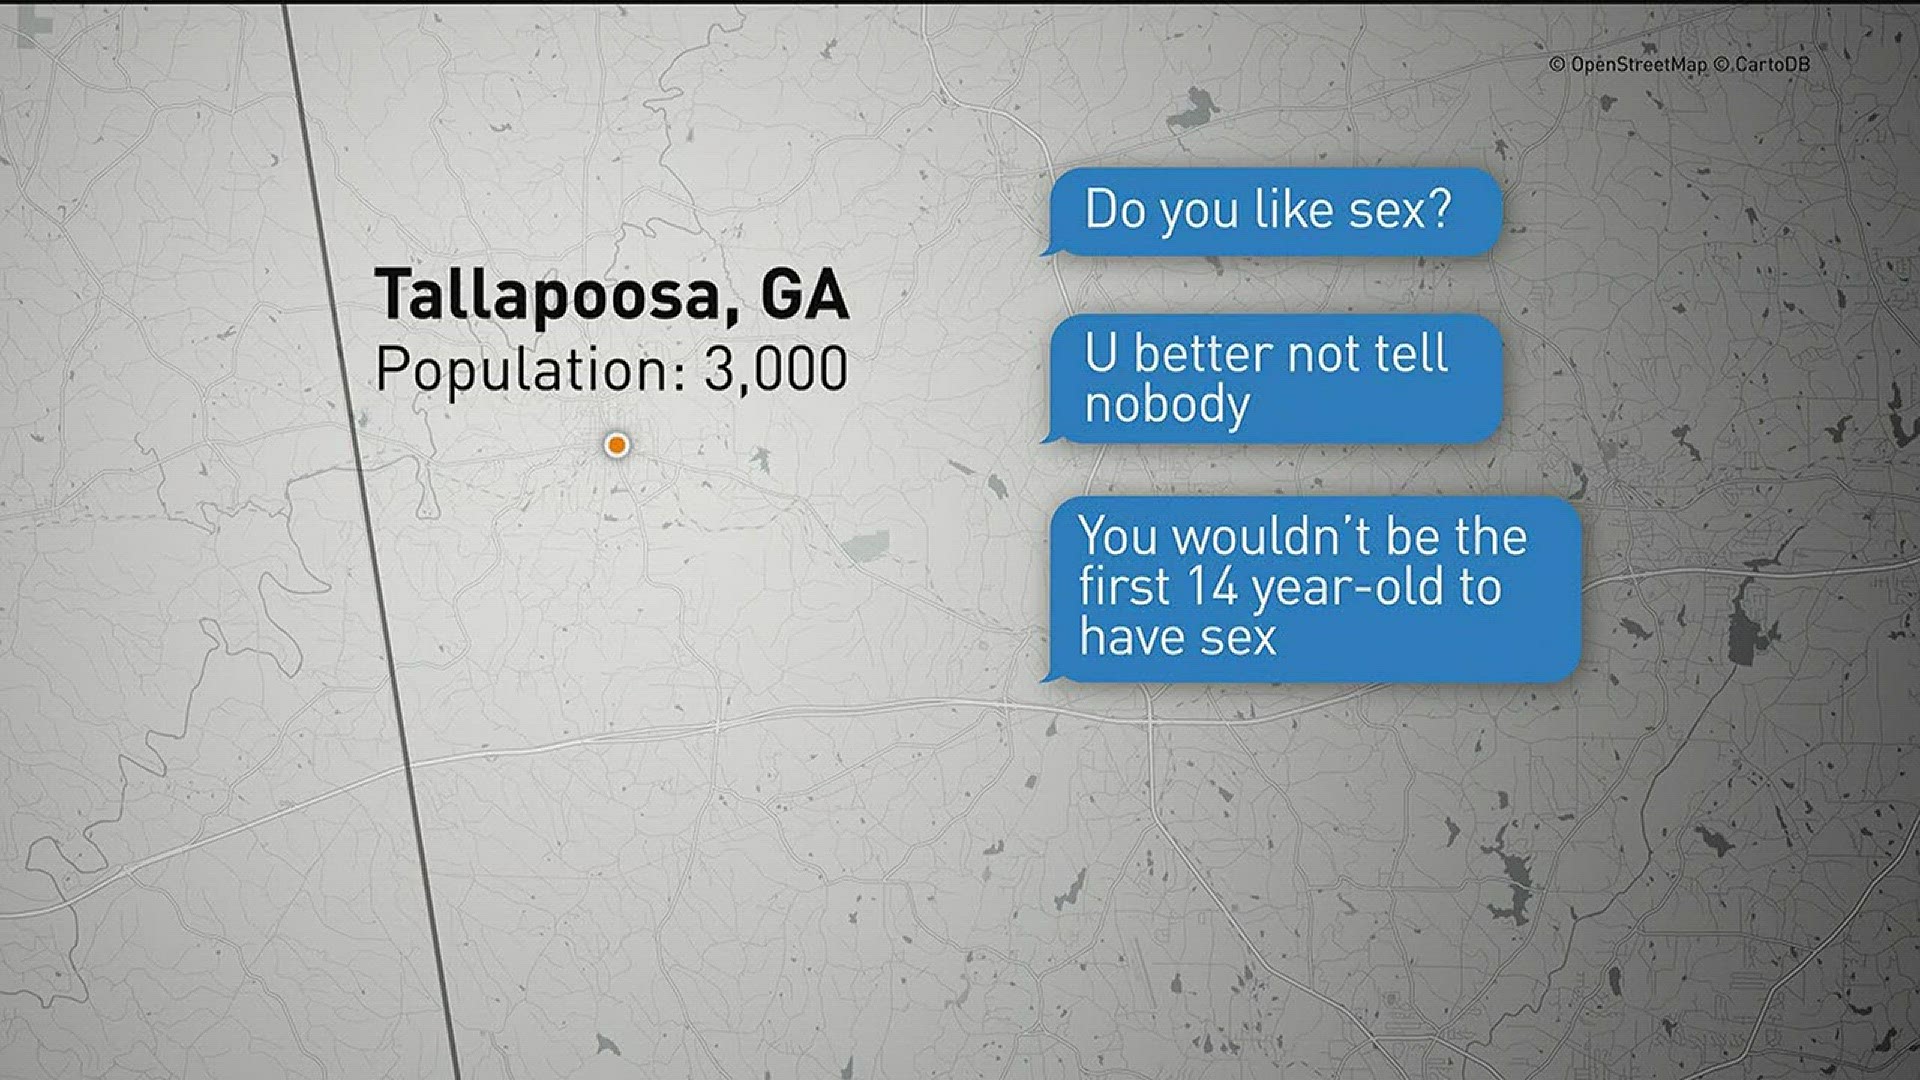 Men between the ages of 27 and 71 came to Tallapoosa to have sex with children, officials said.